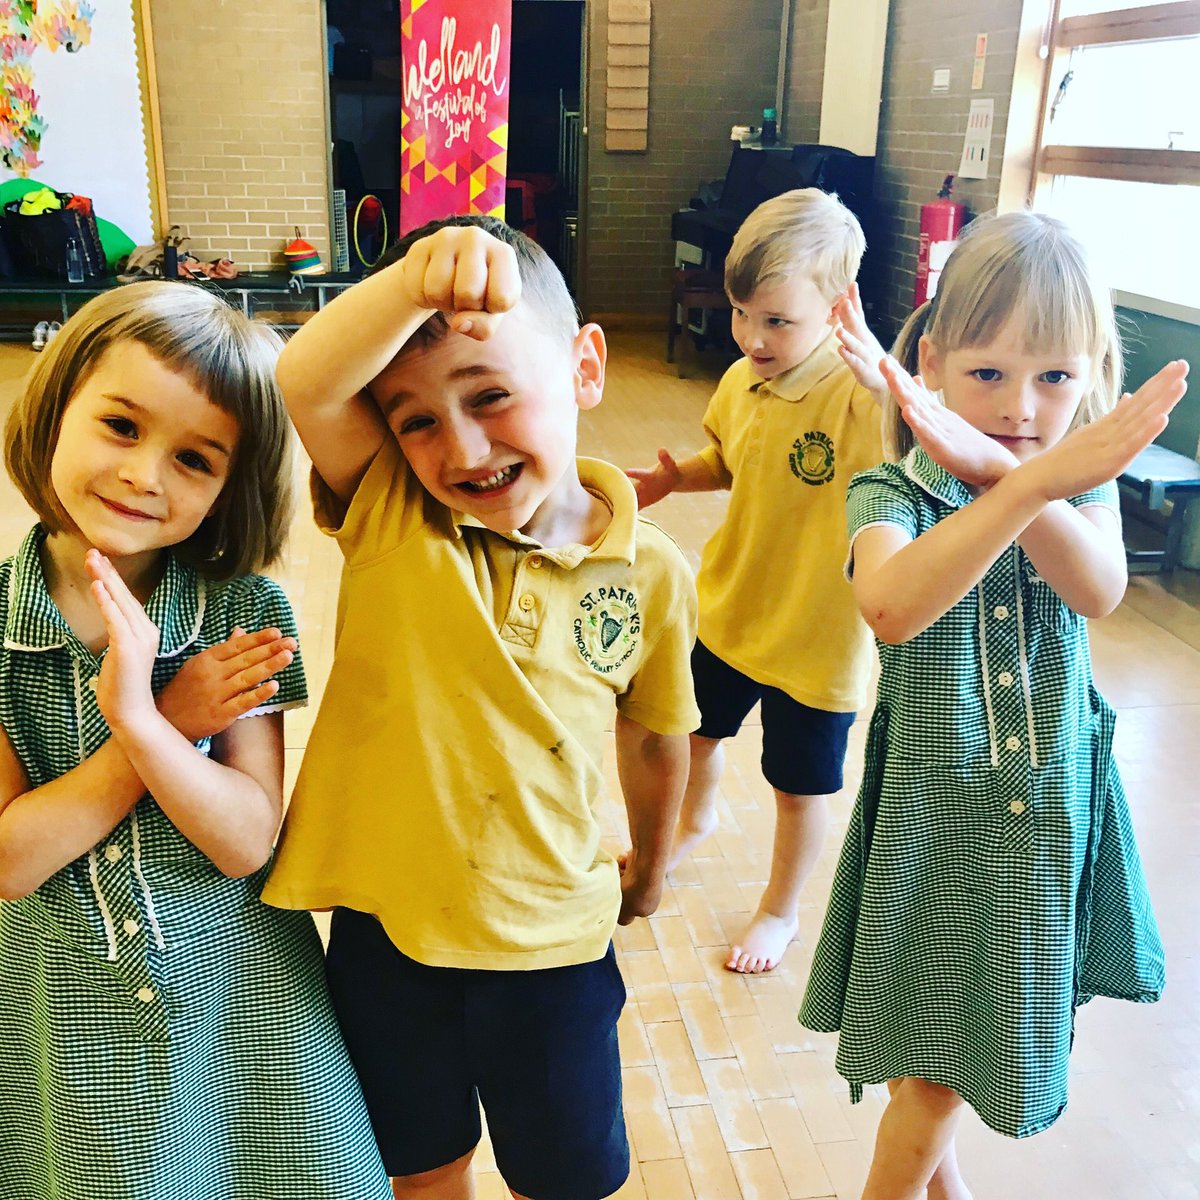 This time last year our wonderful #schools #workshops were happening! We explored ‘Imaginary Communities’ with @choltheatre, where children created their own worlds through #drama and #dance. Here’s a world of warriors! 
#education #imagination #creativity  #communication #story